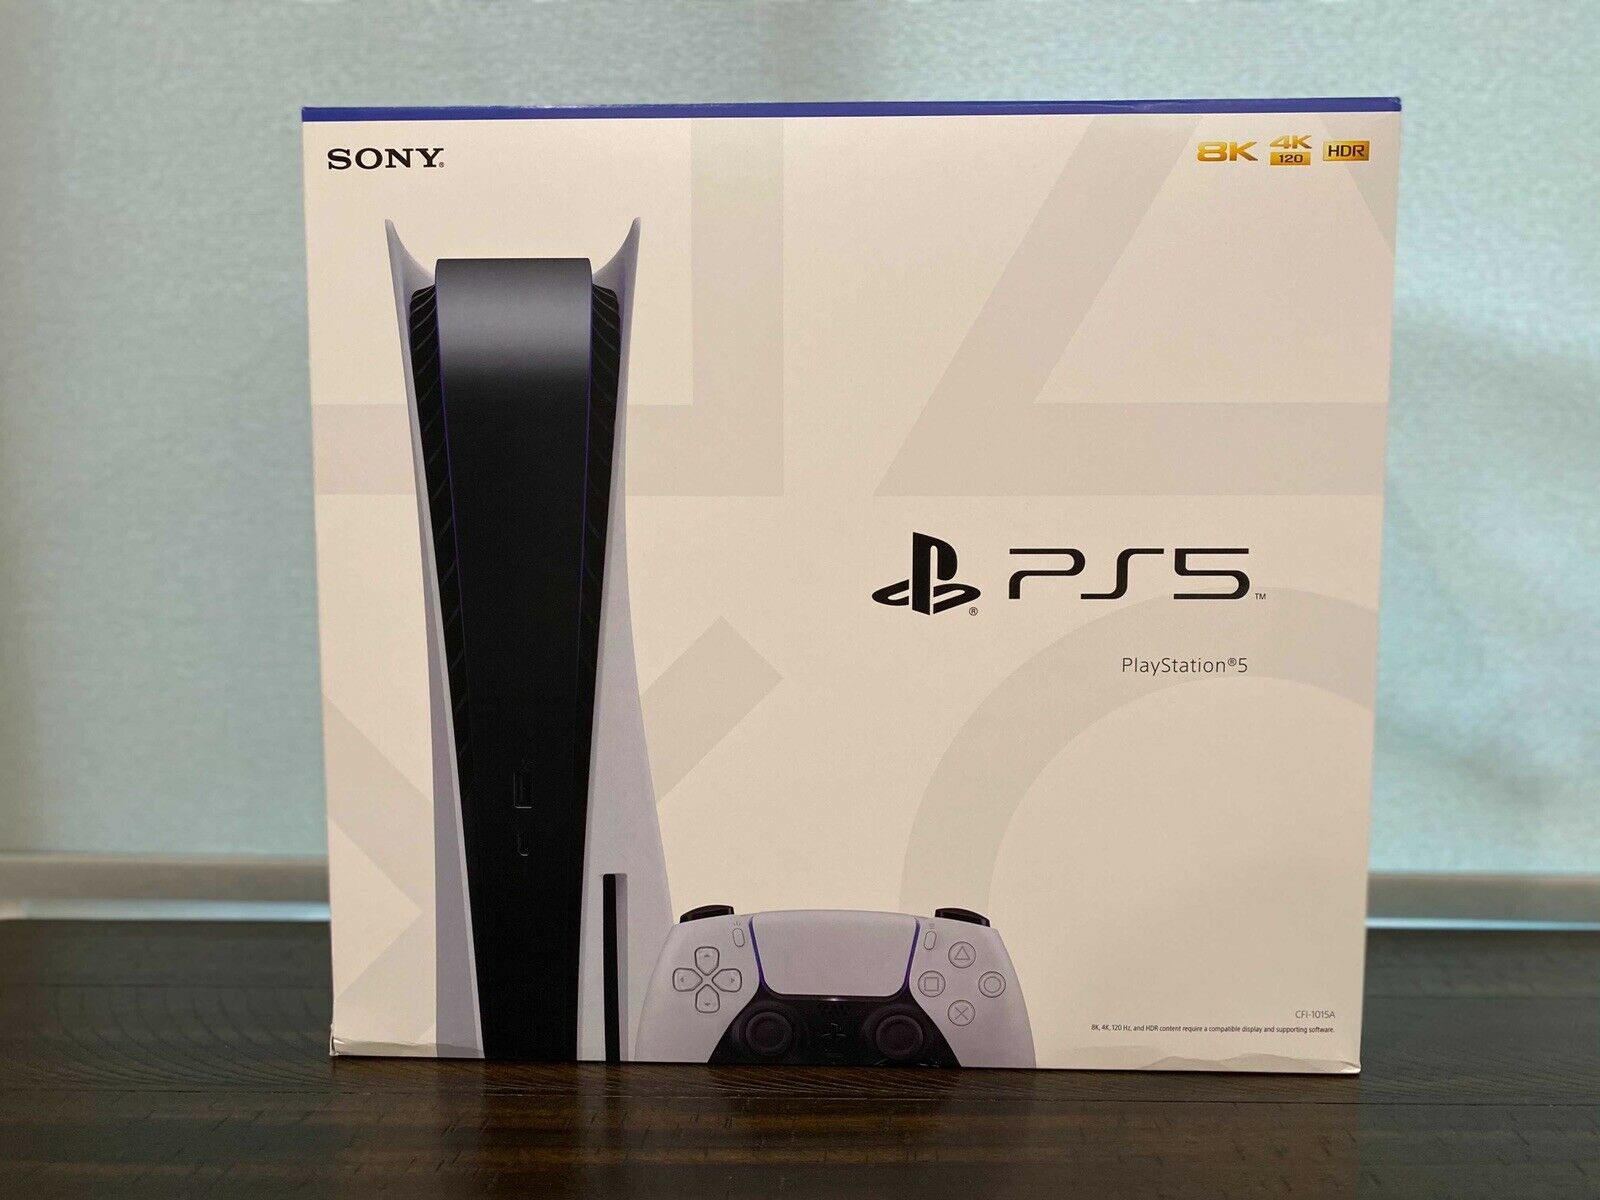 British People Are Bidding up to 87,000 to Buy a Photo of a PS5